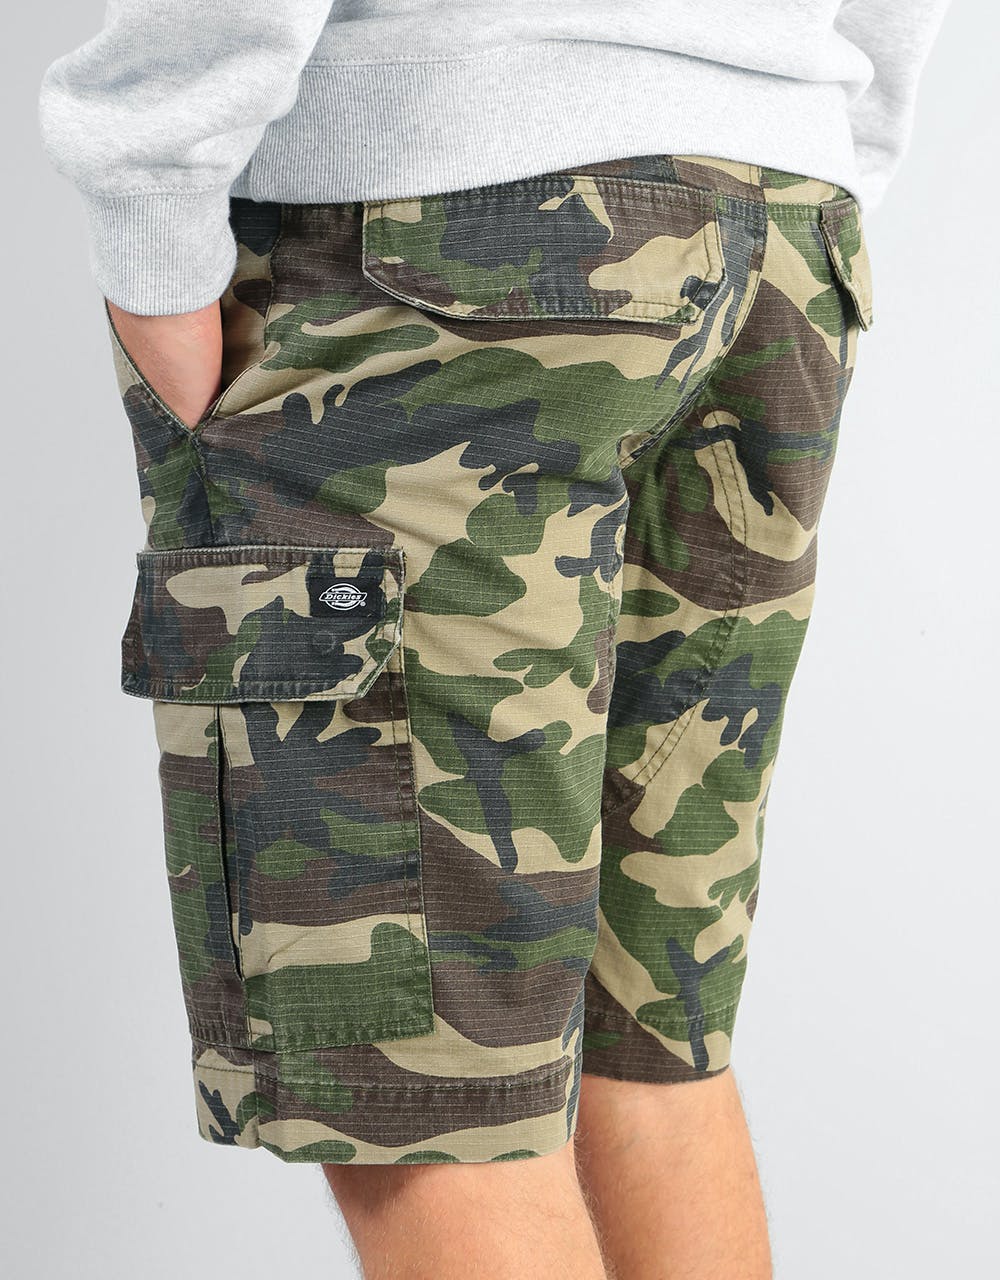 Dickies New York Shorts - Camouflage